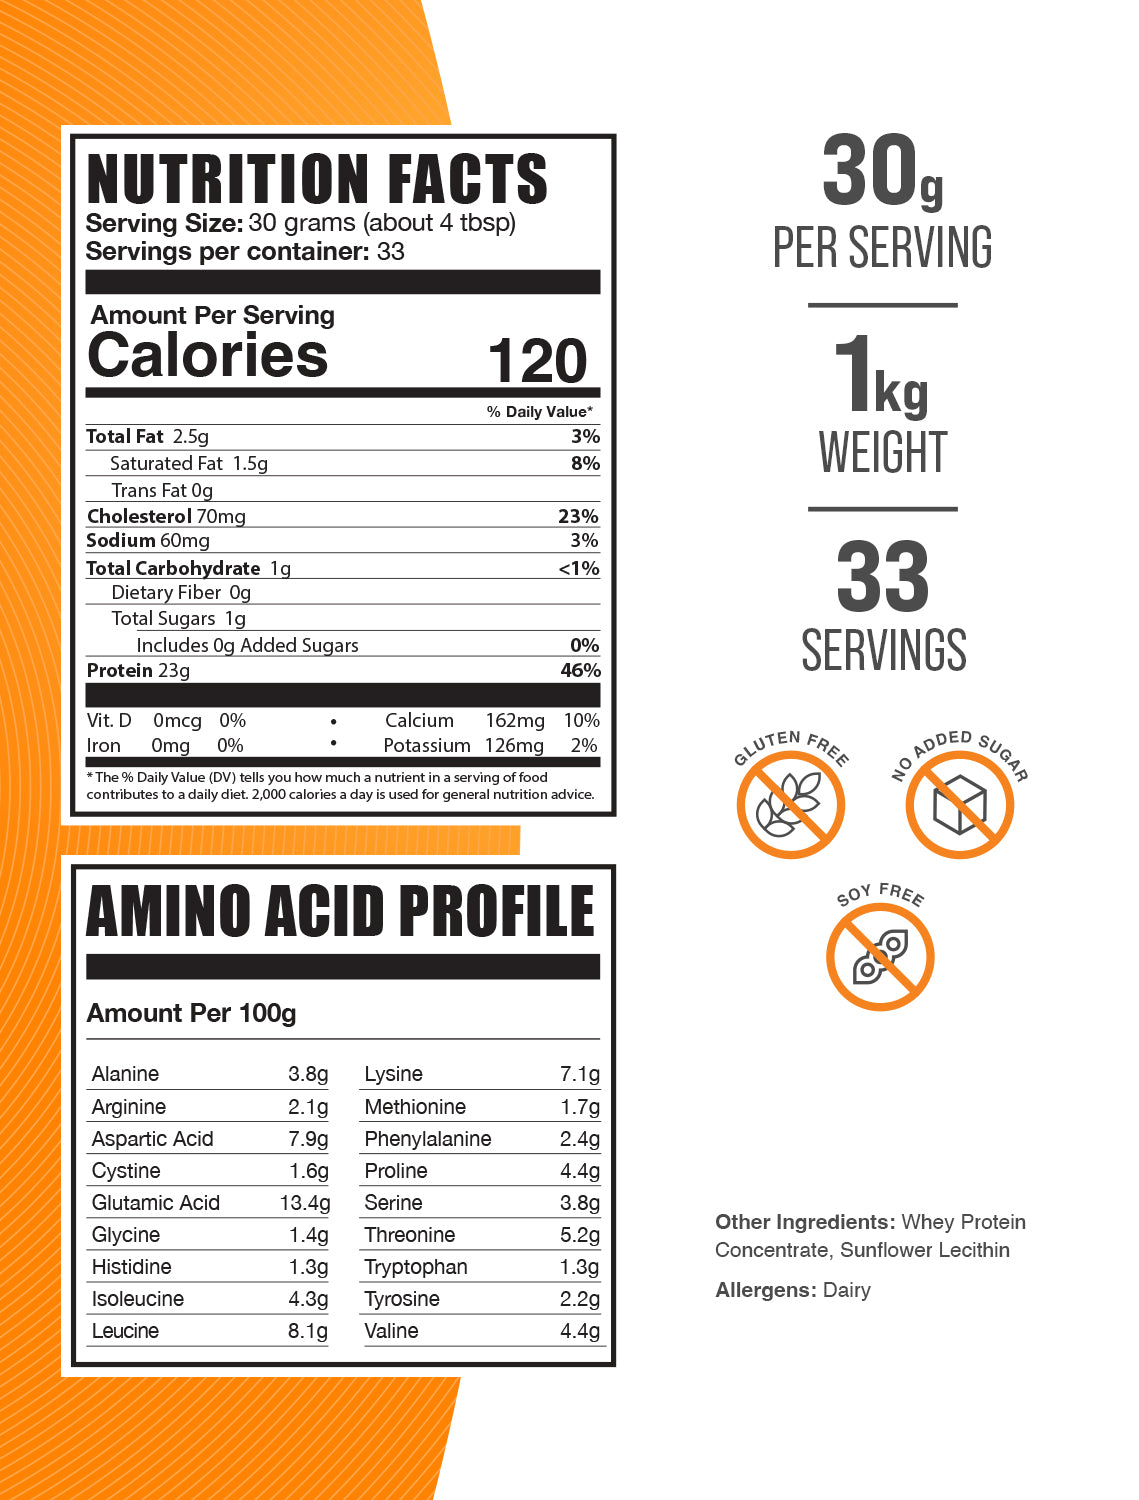 Whey protein concentrate 1kg Label